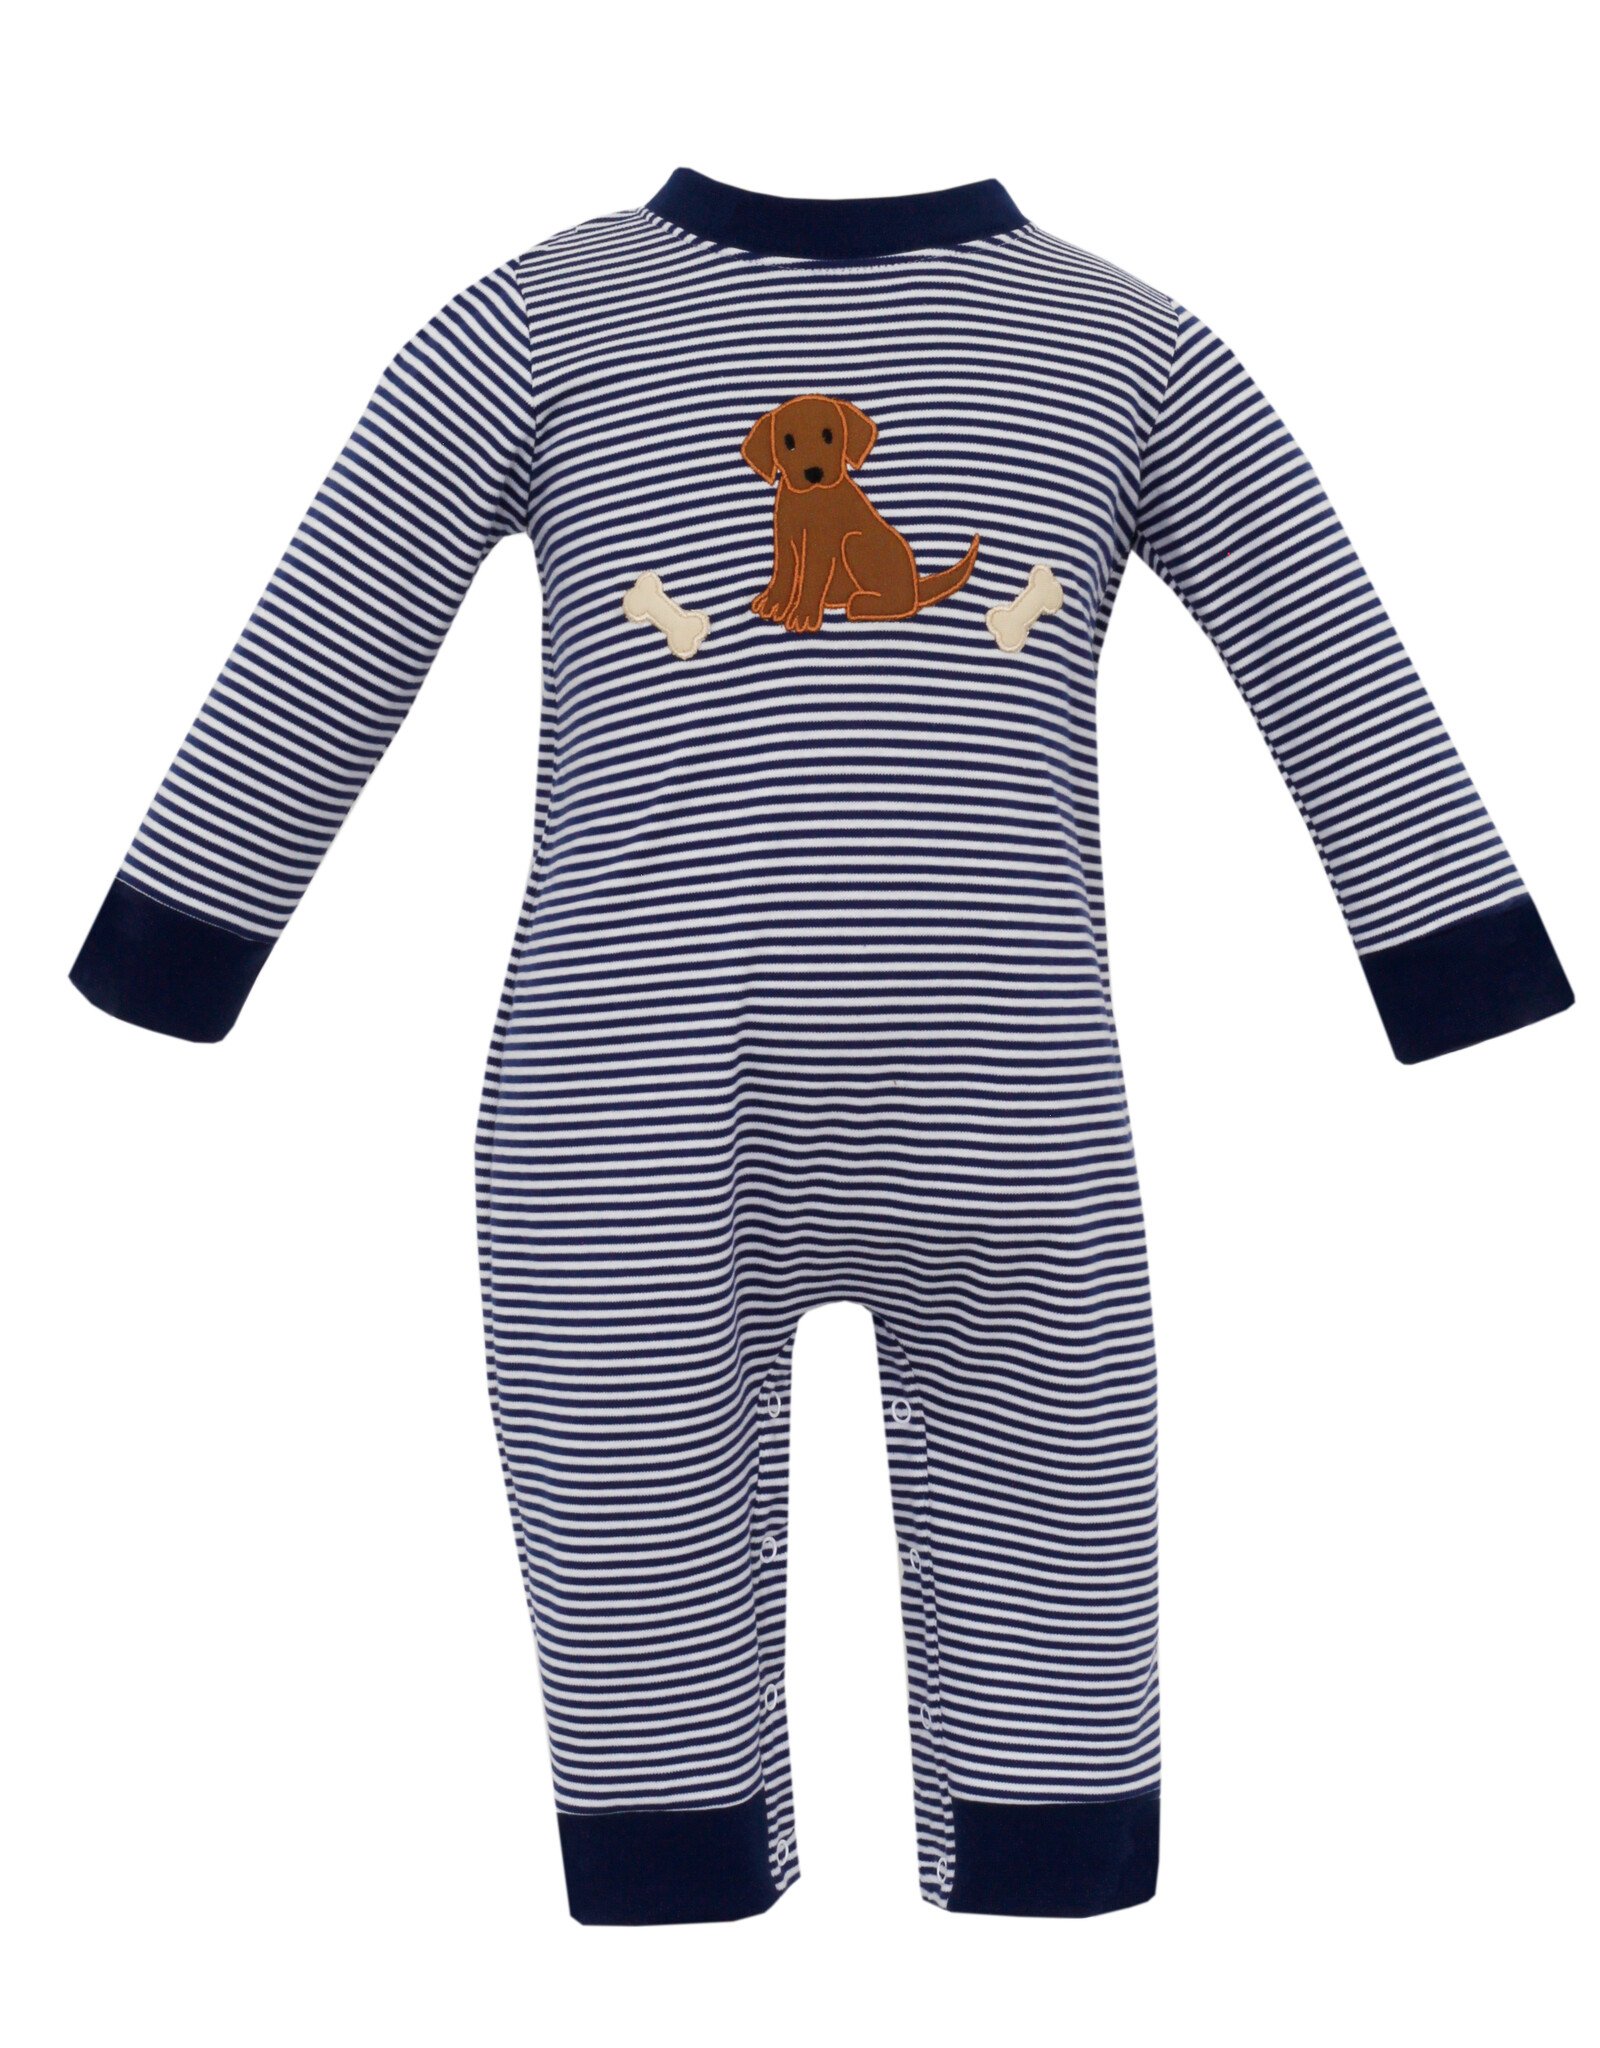 Claire and Charlie Puppy Long Romper w/Bone